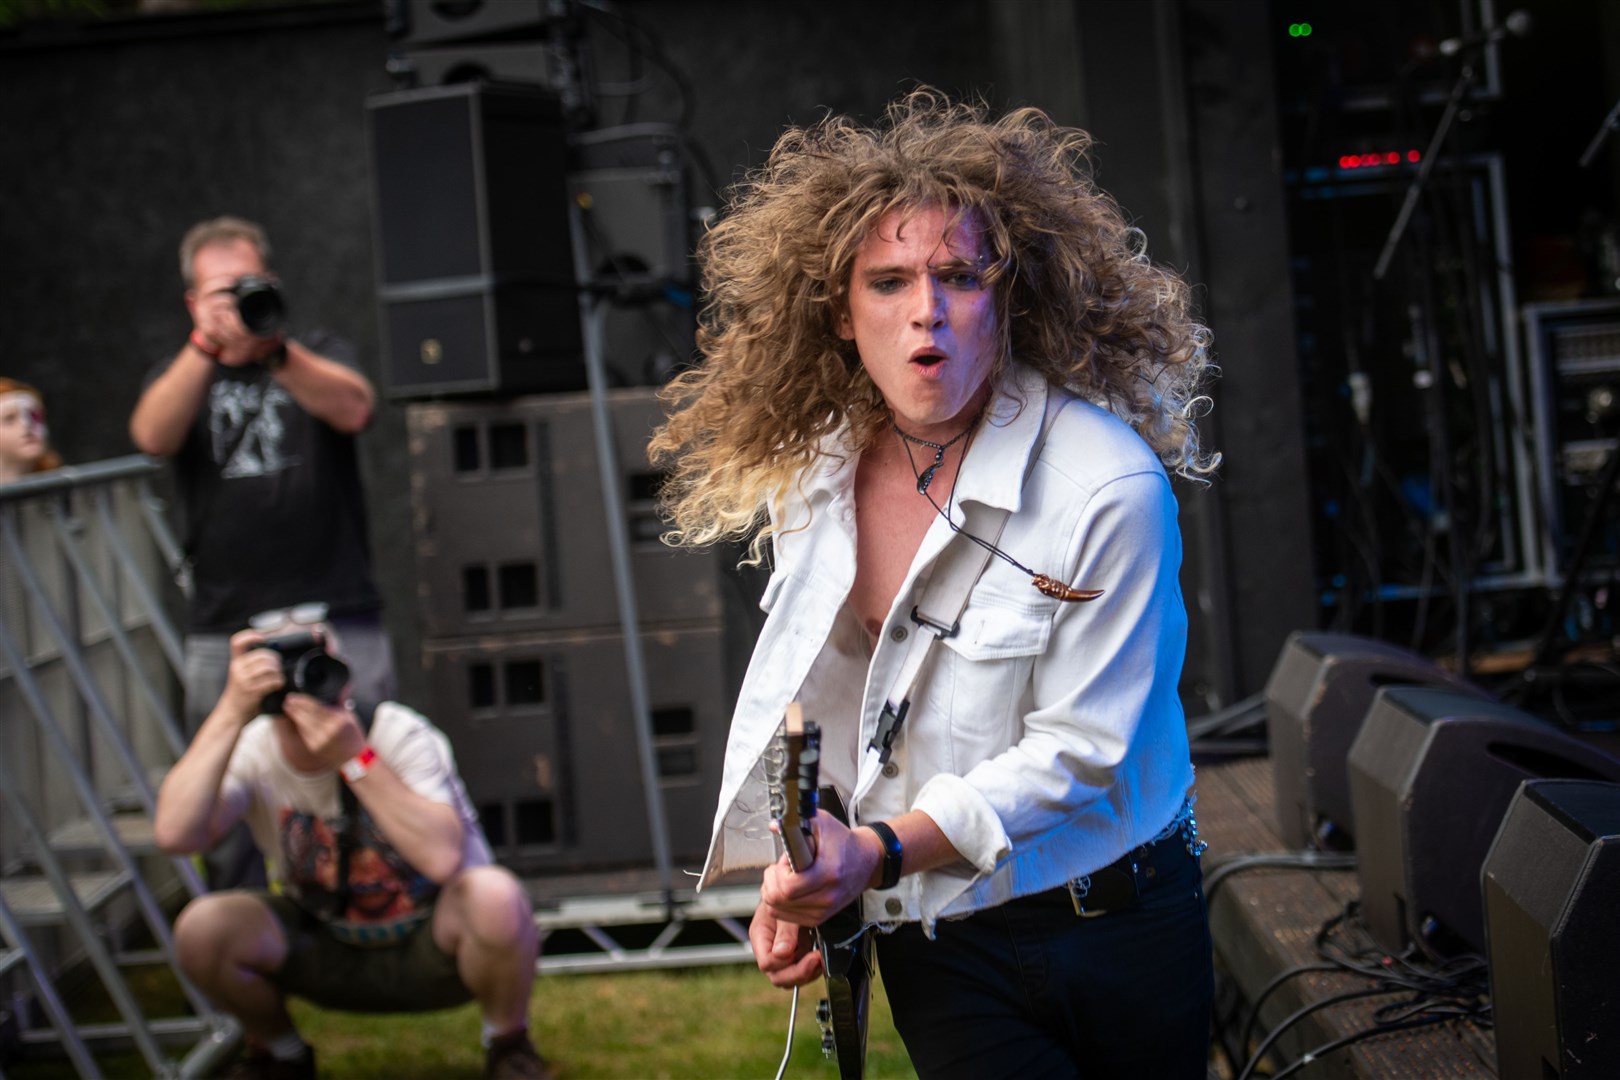 Bad Actress guitarist Chick in the frame at last weekend's Woodzstock festival. Picture: Callum Mackay